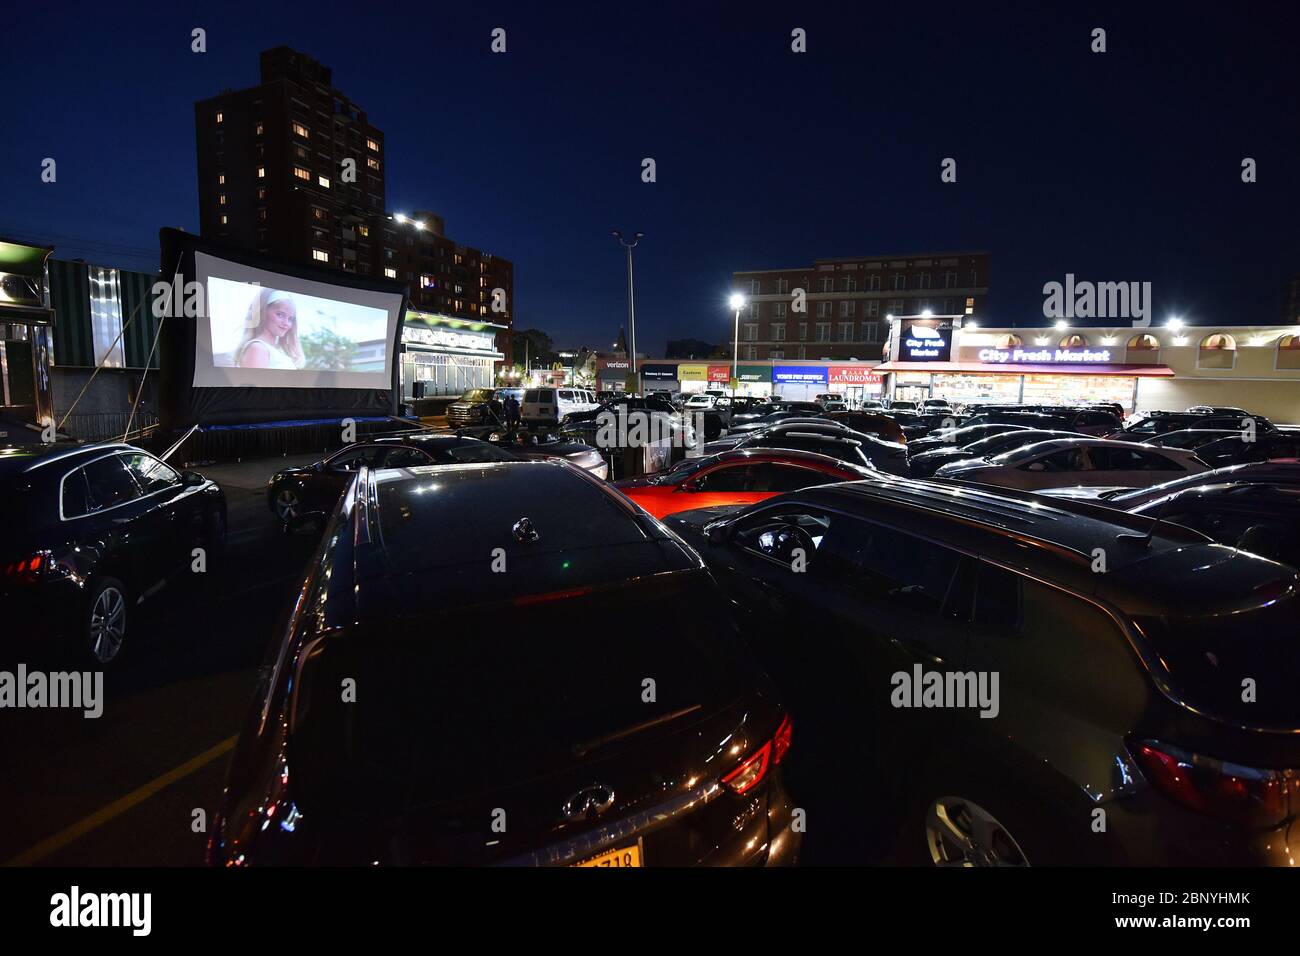 New York City, USA. 16th May, 2020. Bel Aire Diner in the Astoria neighborhood of Queens, has been transformed into a drive-in movie theatre during the COVID-19 pandemic, New York, NY, May 16, 2020. With restaurants limited to take-out under Coronavirus city rules, Bel Aire Diner allows motorist who reserved spots in their parking lot to order from the diner as they watch a movie. (Anthony Behar/Sipa USA) Credit: Sipa USA/Alamy Live News Stock Photo